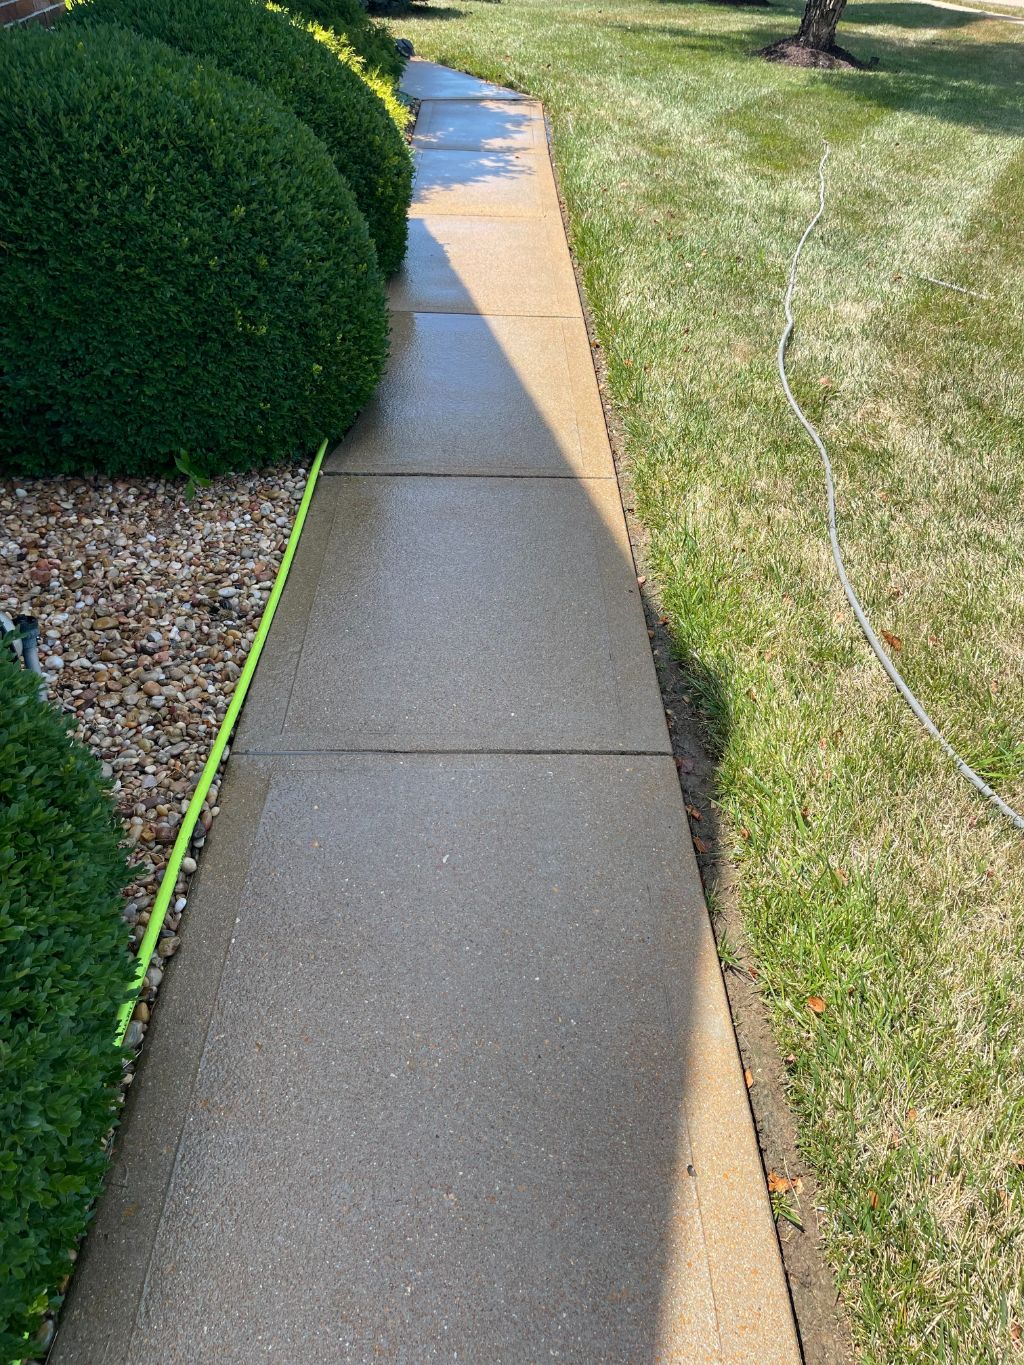 House wash gutter cleaning concrete cleaning house springs mo